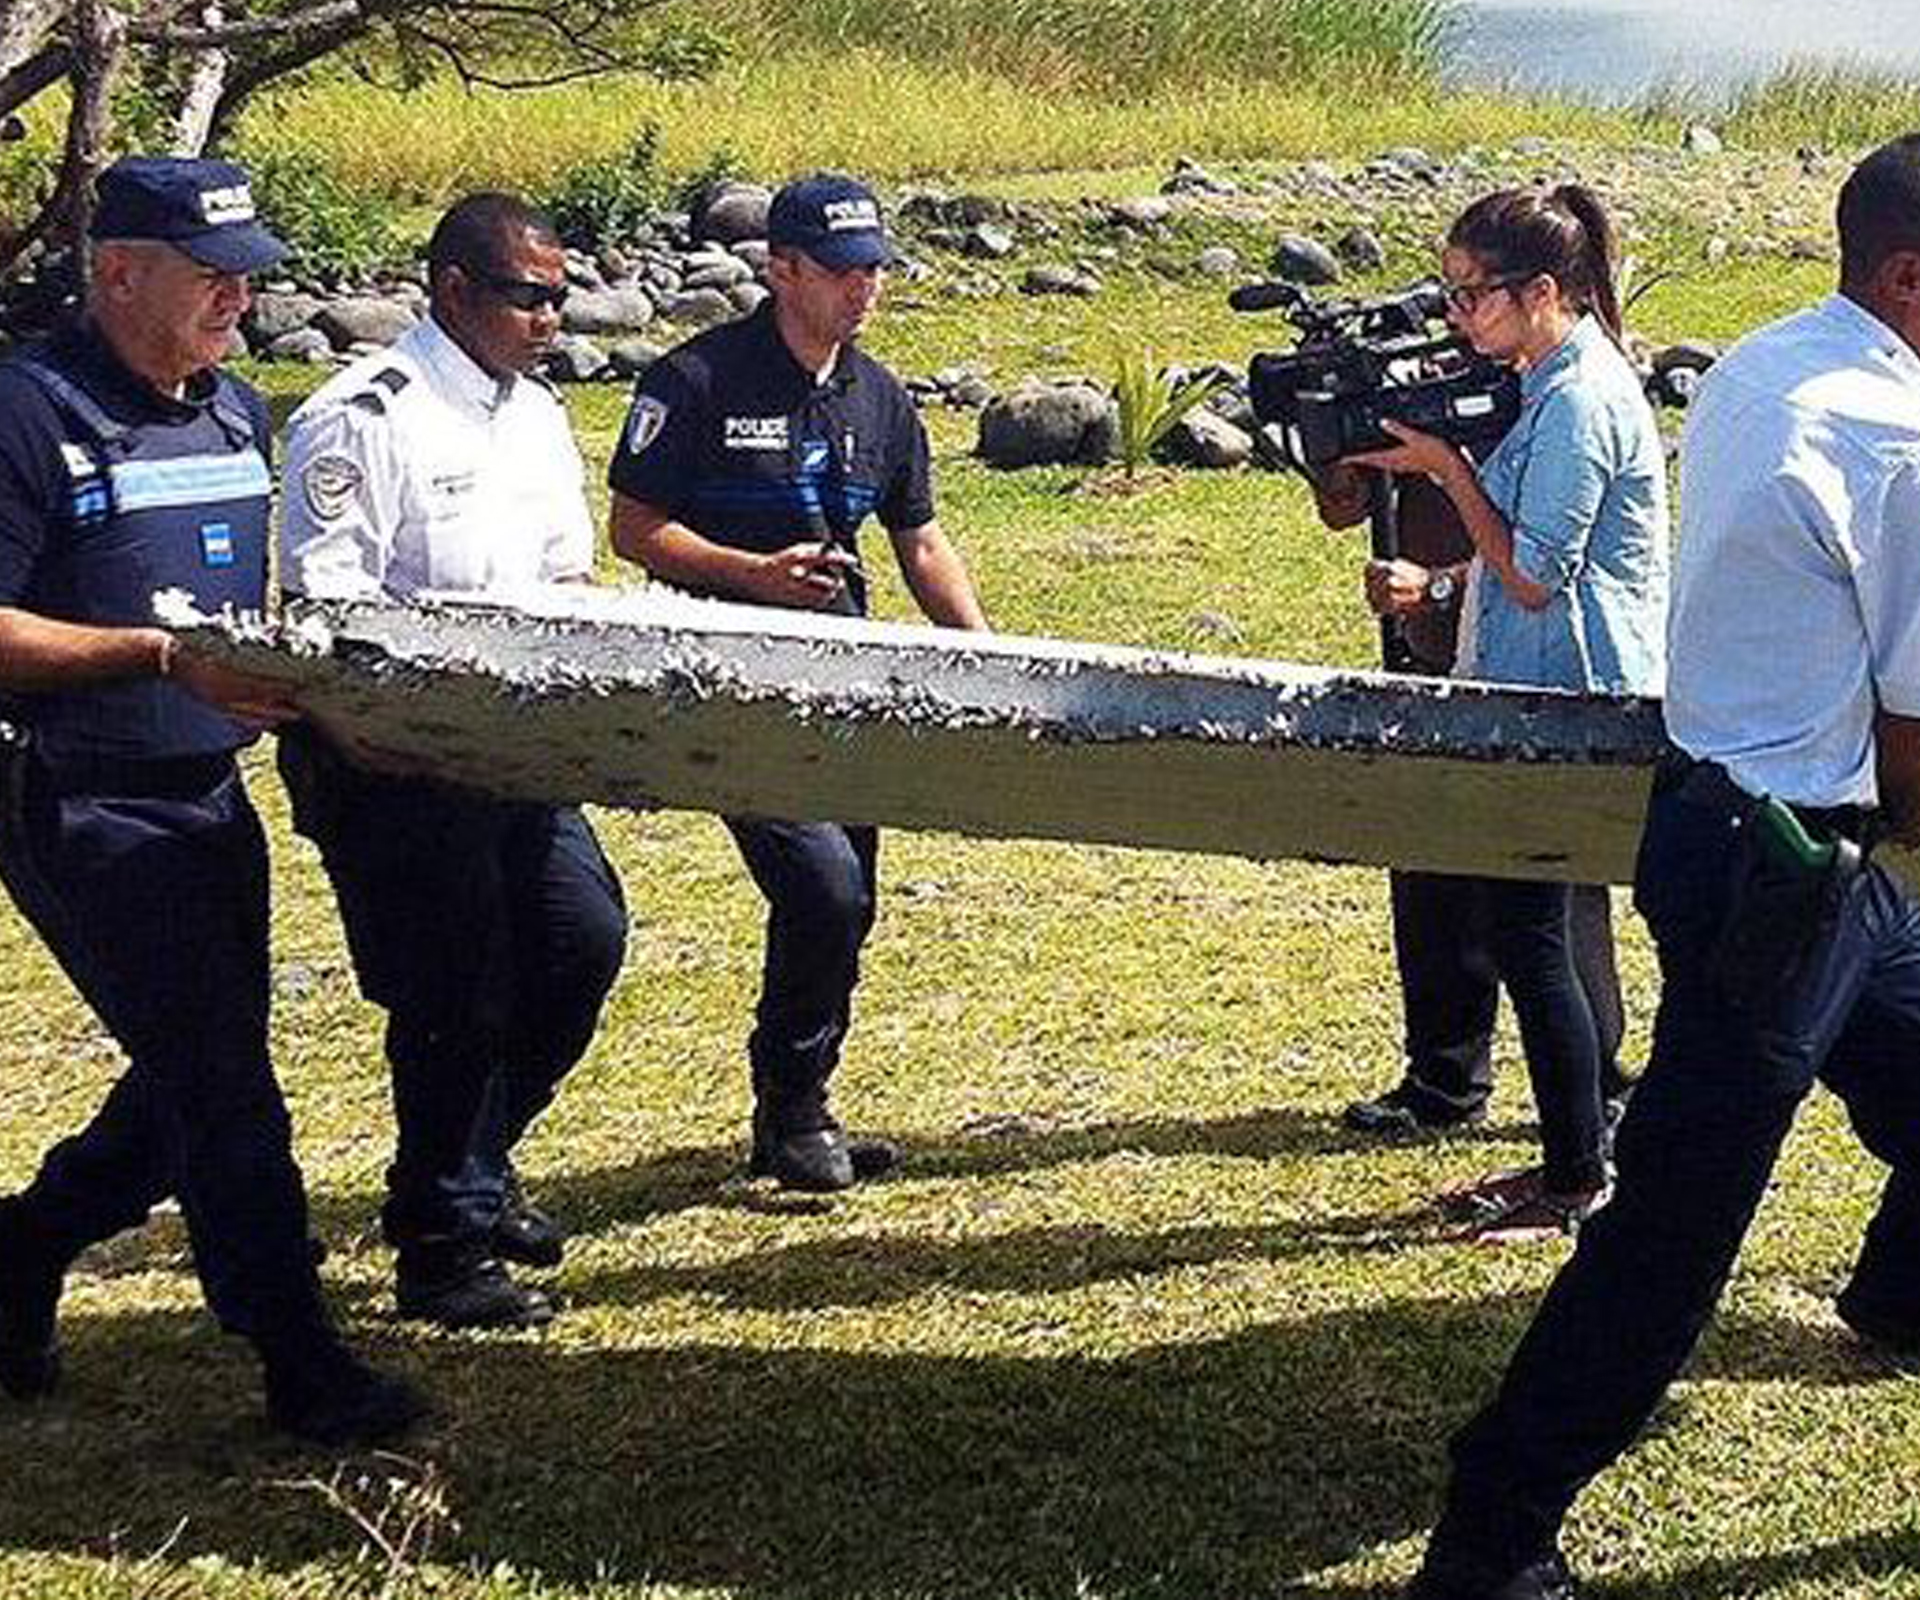 Washed up wing confirmed to be from missing flight MH370